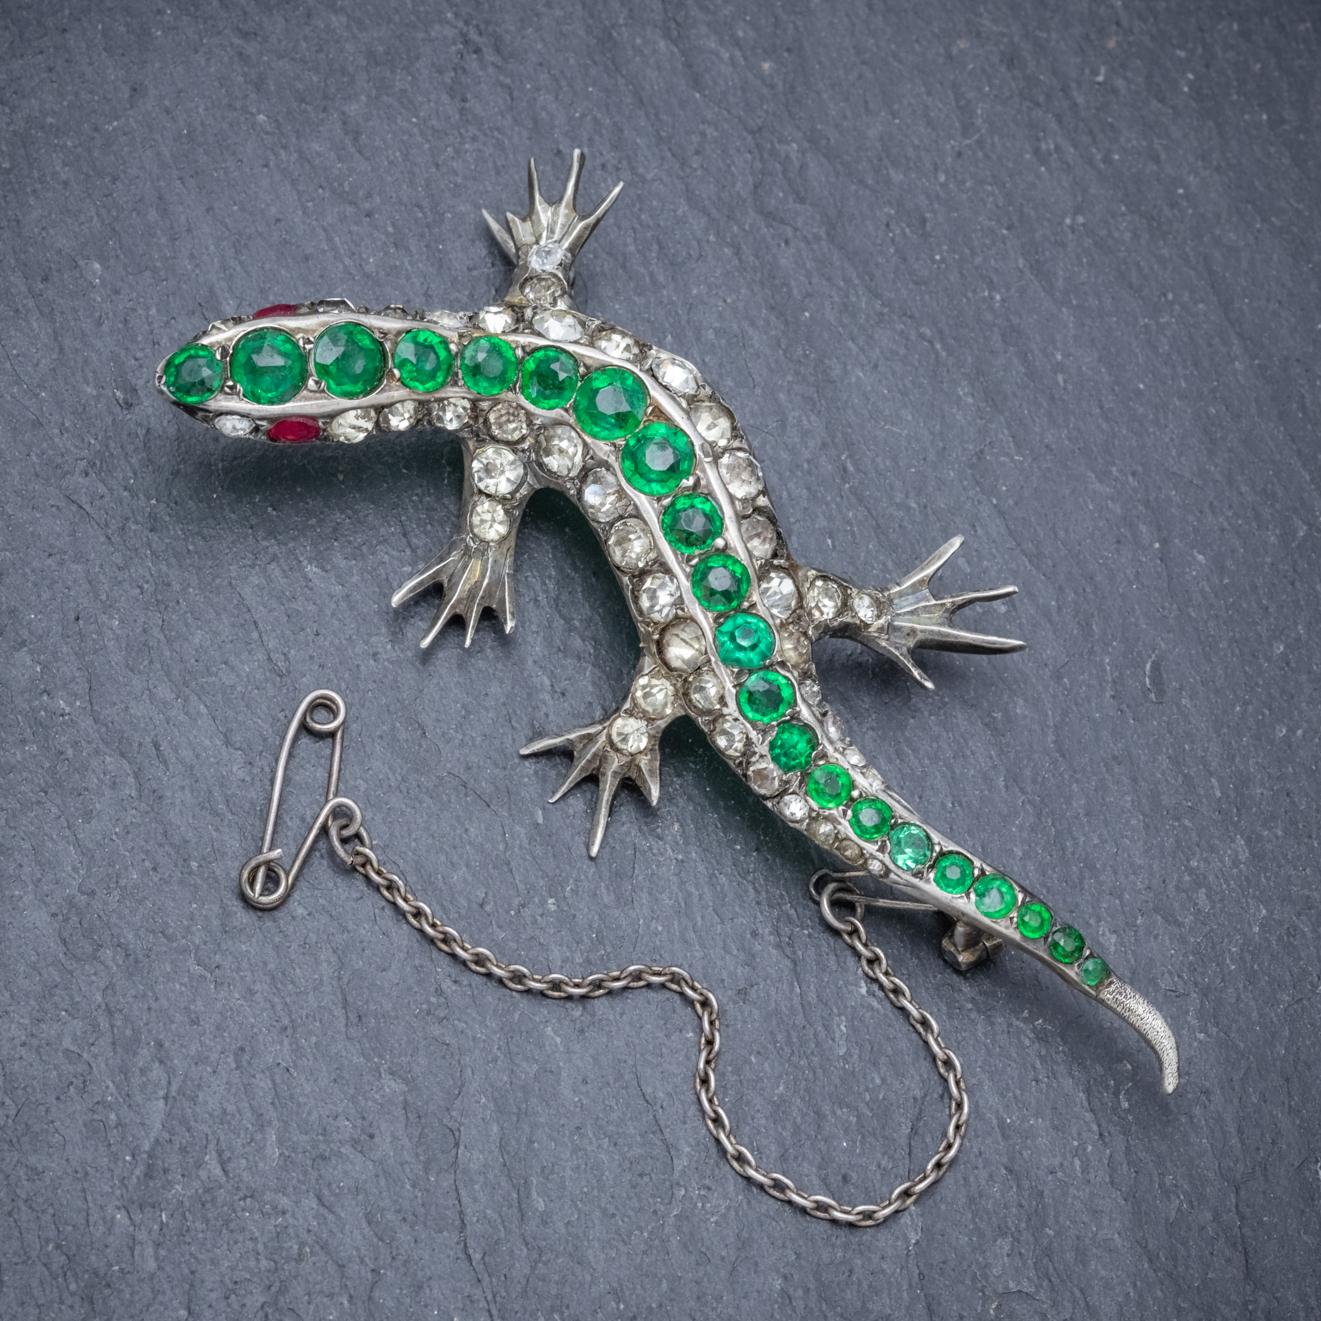 A delightful antique Victorian Lizard brooch crafted in Silver and decorated with sparkling white and green Paste Stones down the back with red Paste eyes at the head. 

The piece is three-dimensional and fitted with a sturdy pin, safety catch and